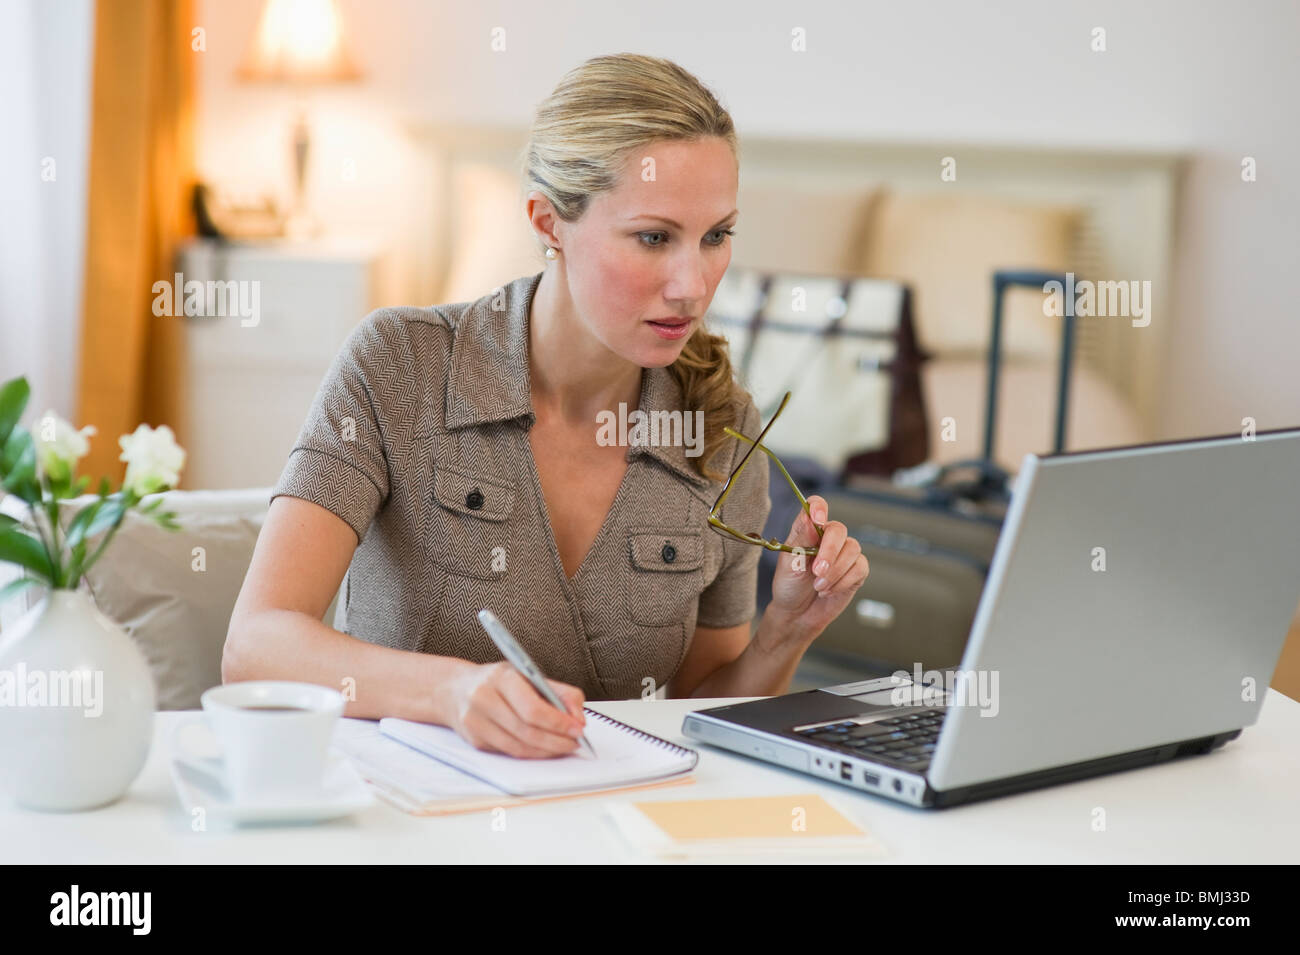 Woman working in hotel room Stock Photo